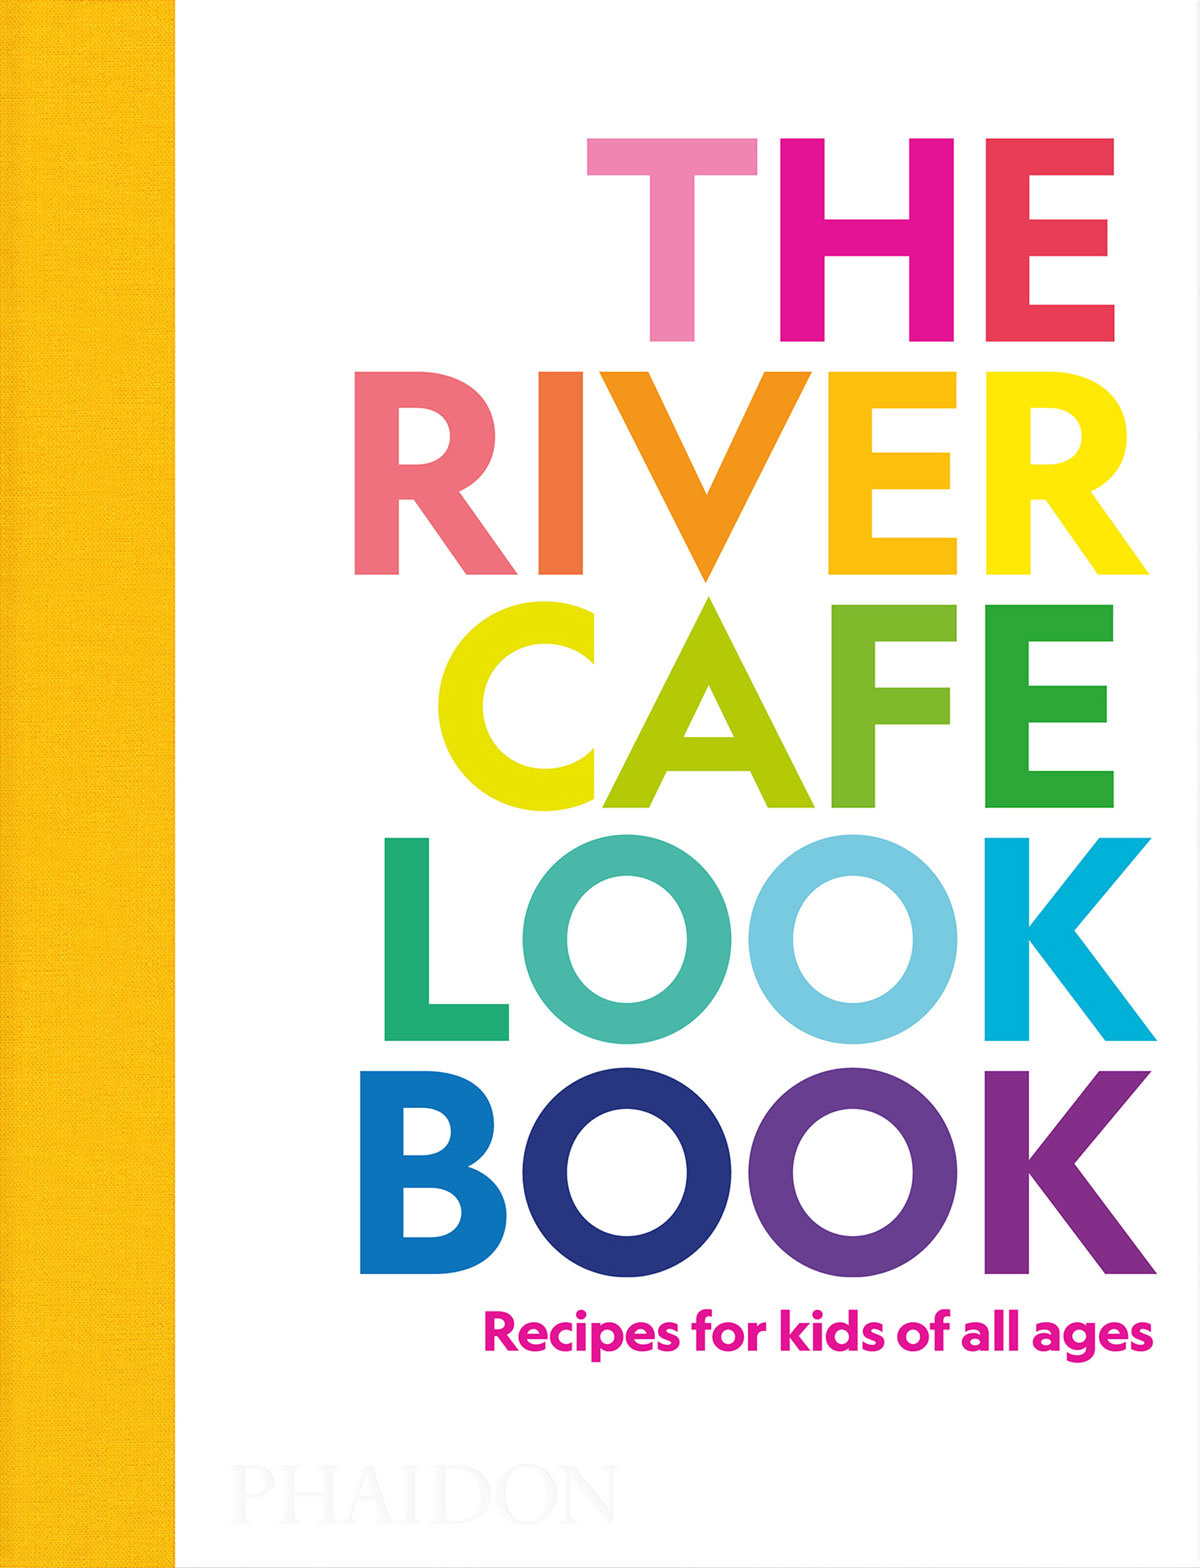 Book cover of The River Cafe Look Book by Ruth Rogers, Sian Wyn Owen and Joseph Trivelli